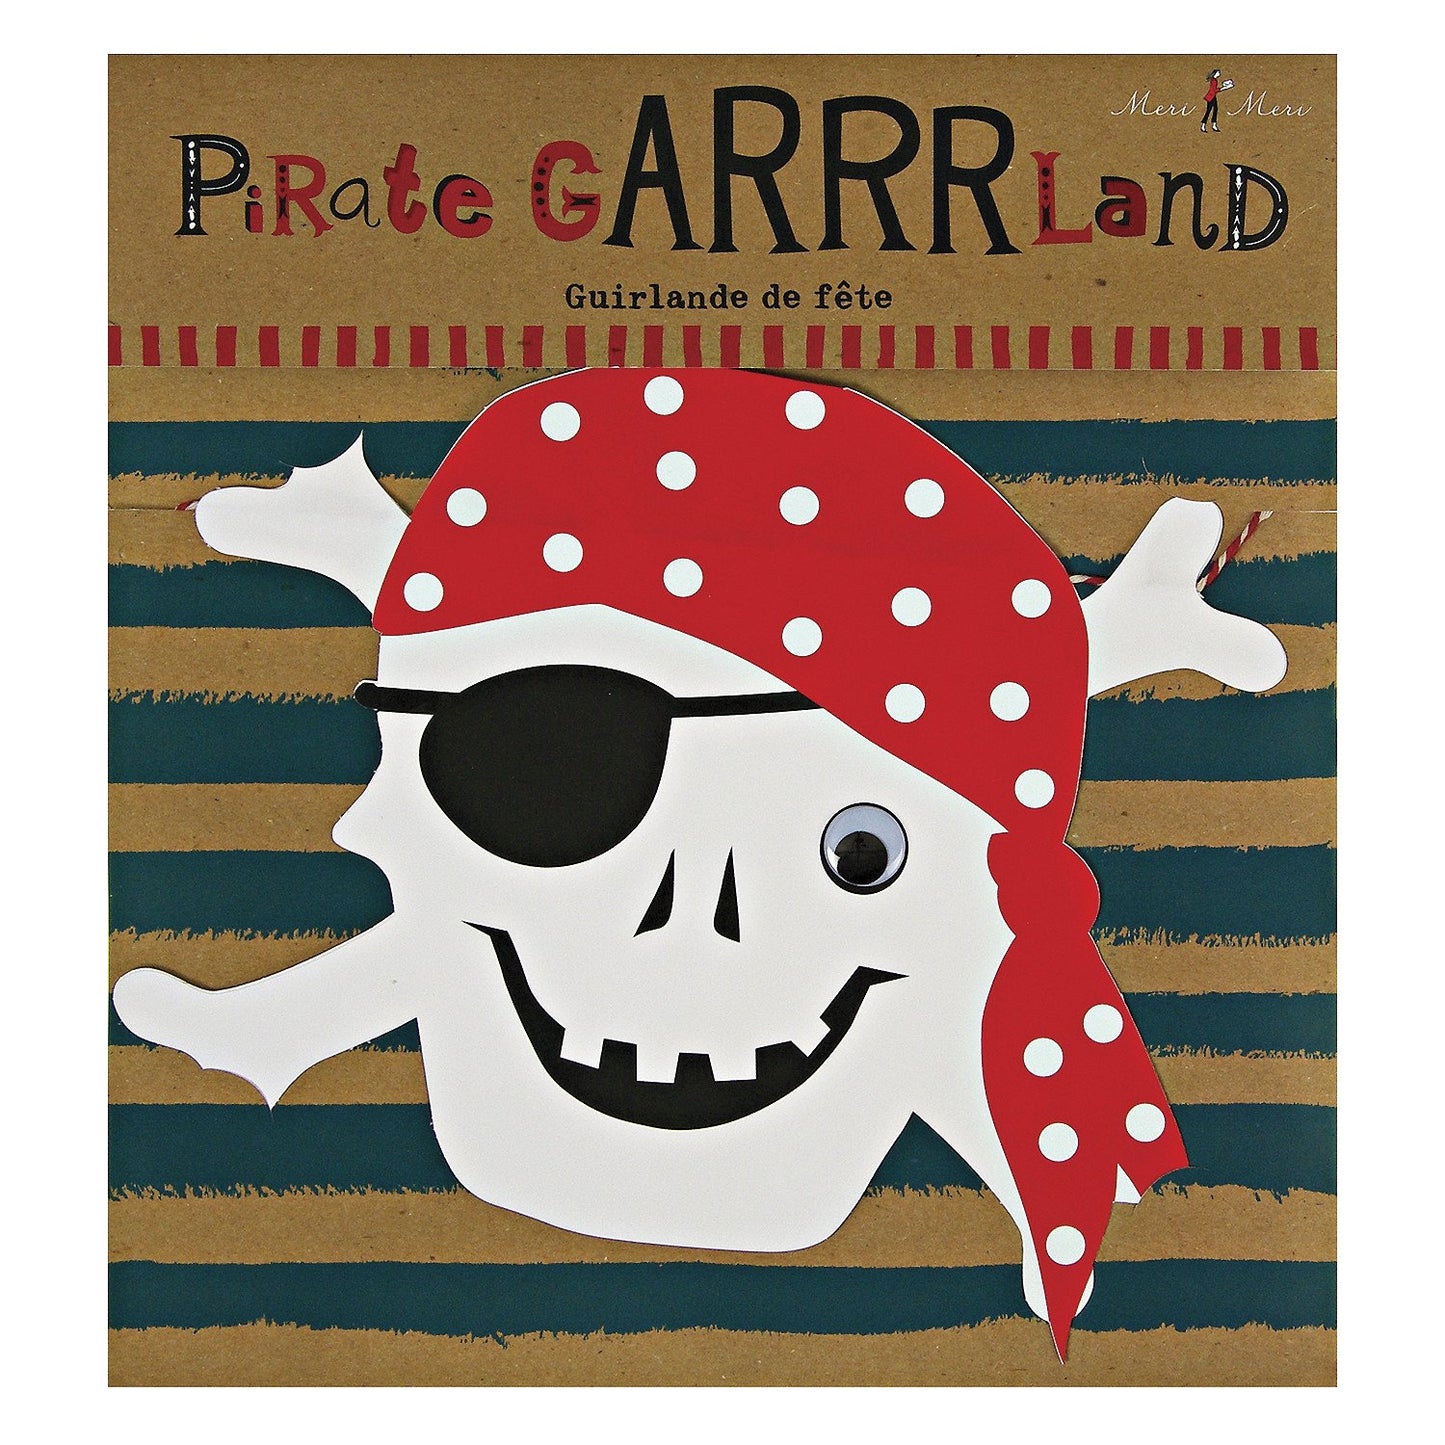 AHOY THERE PIRATE GARLAND